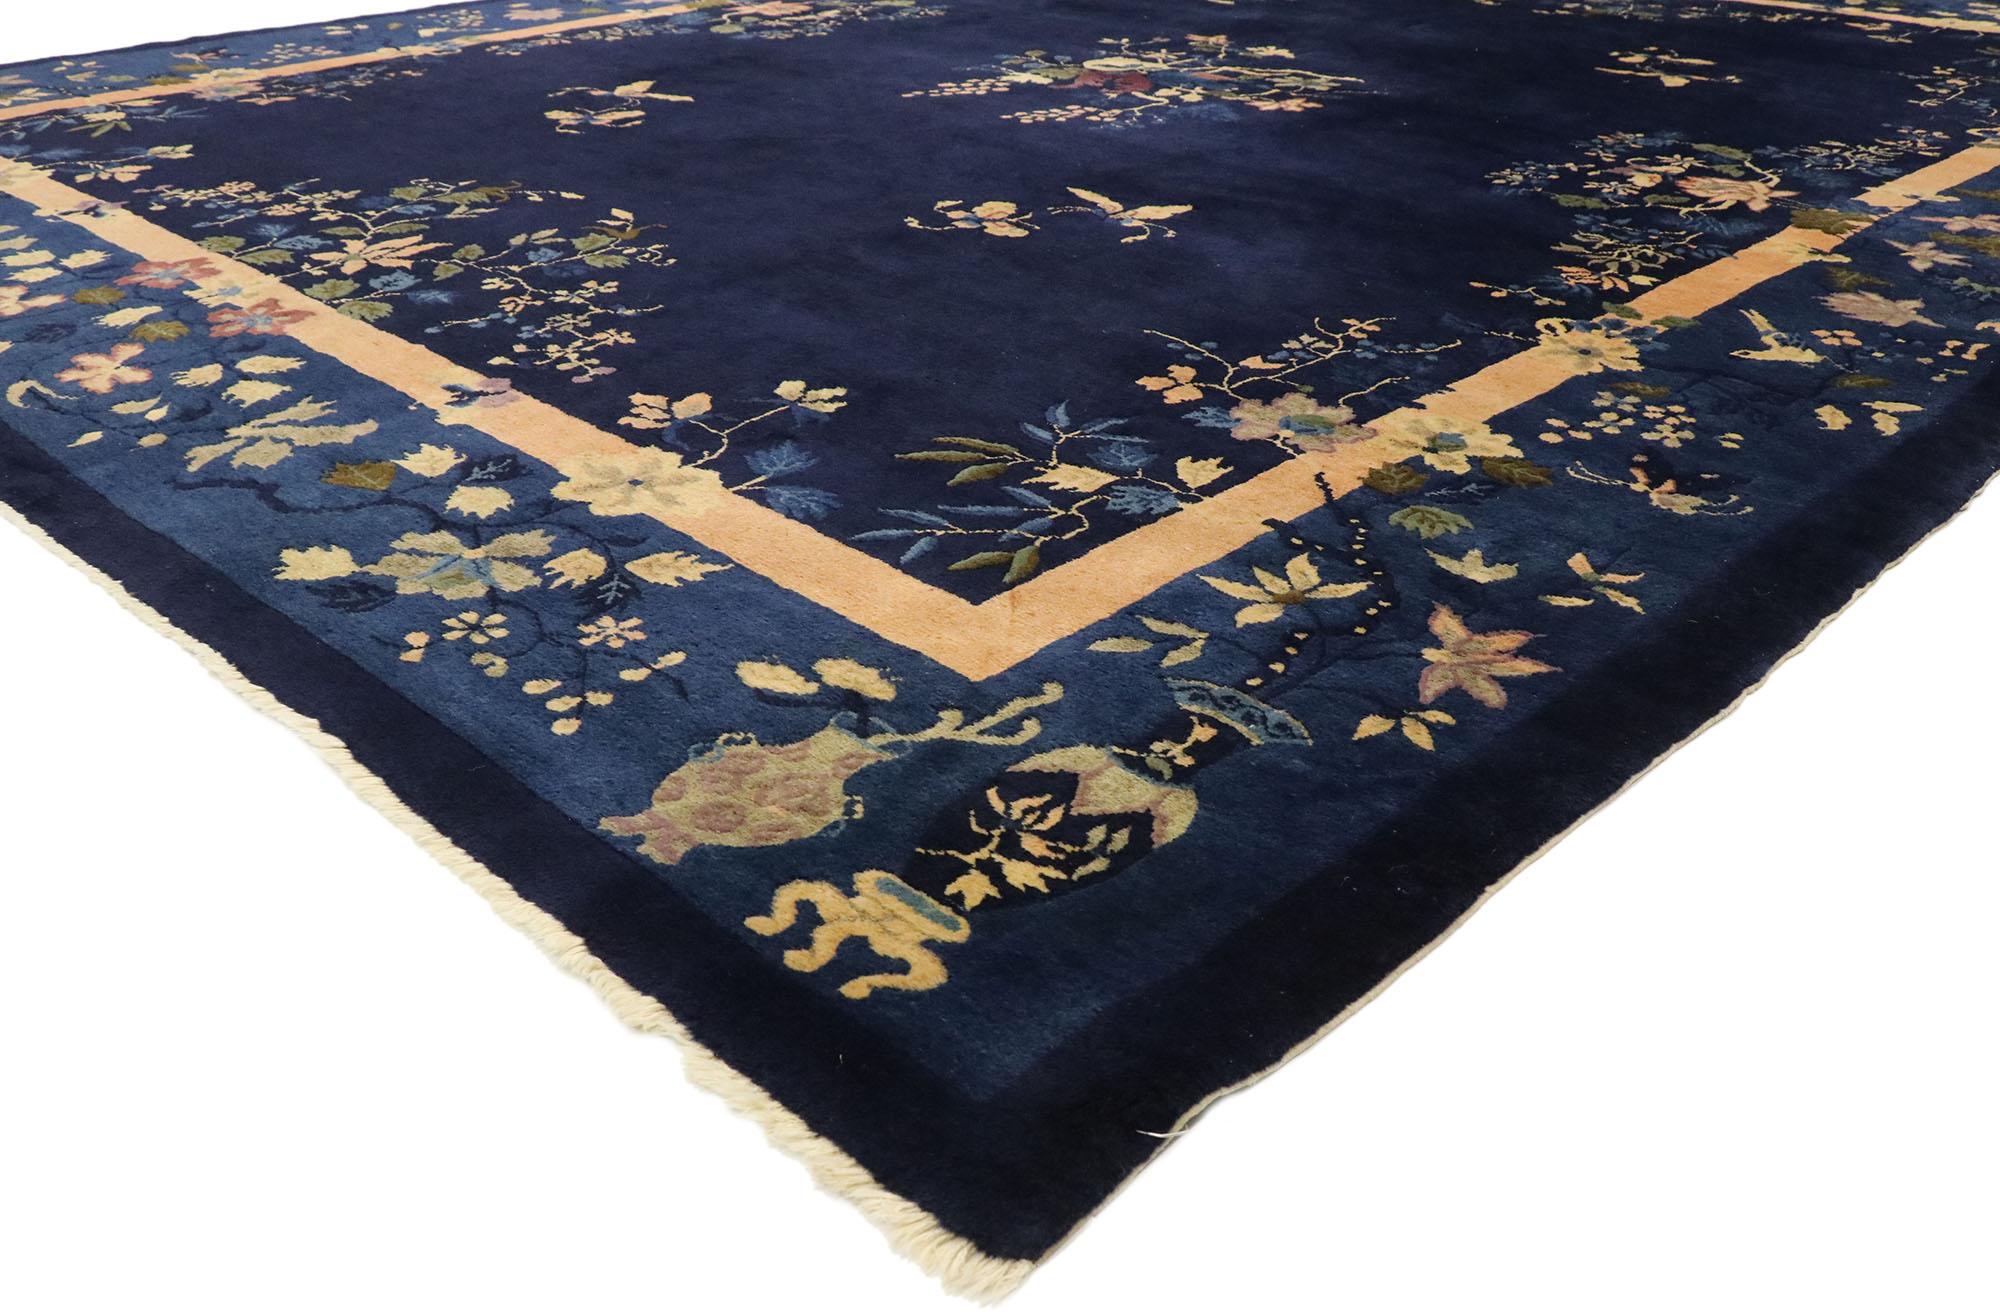 77524, antique Chinese Peking rug with Art Deco style inspired by Walter Nichols. With Jazz Age vibes and Art Deco style, this hand knotted wool antique Chinese Peking rug features an elegant central floral medallion dotted with four pairs of